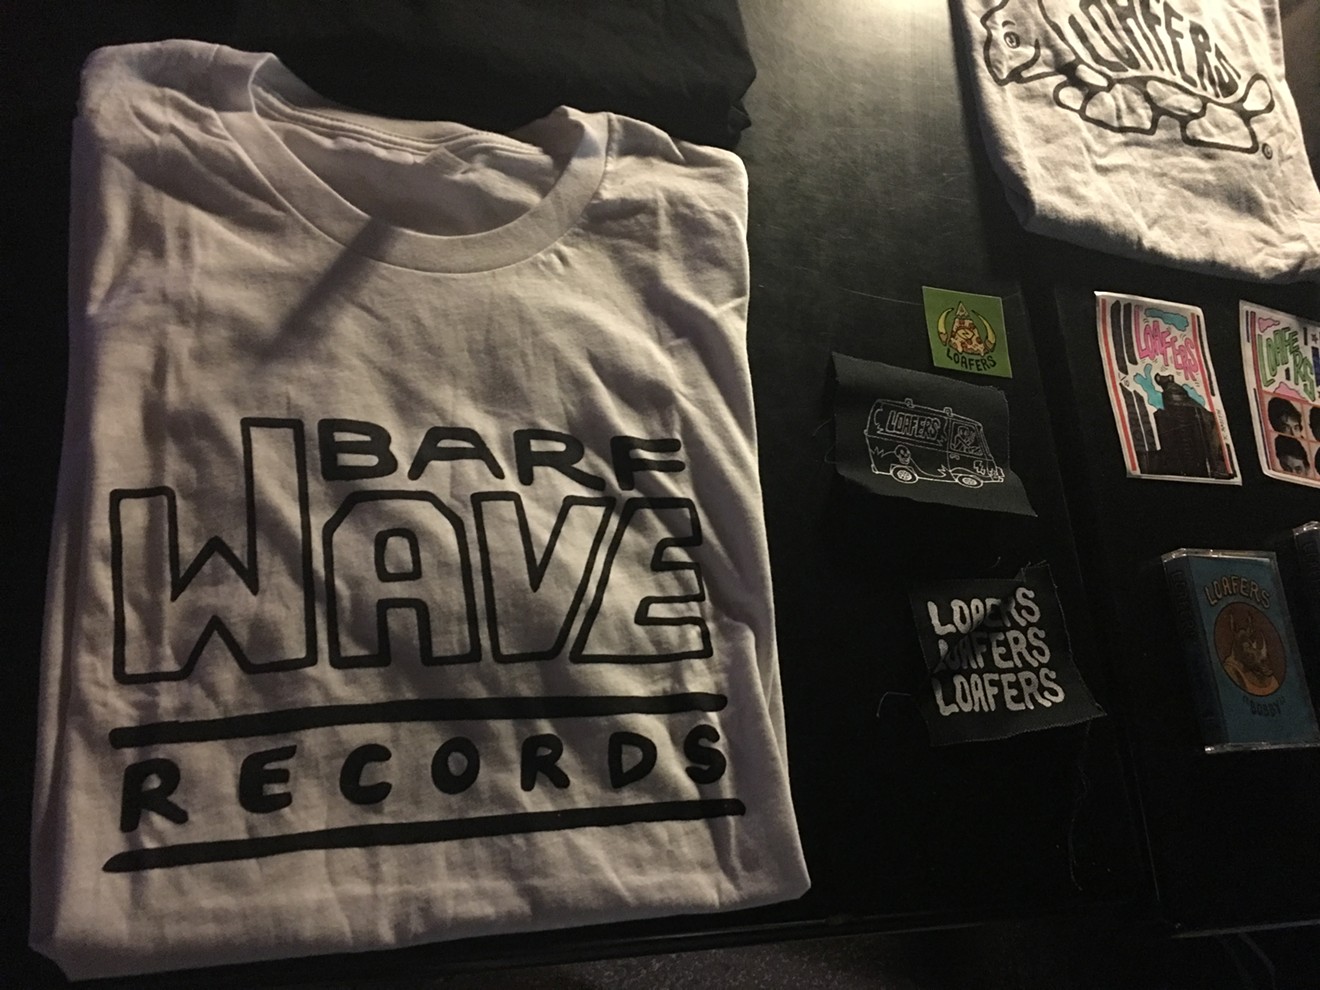 Barf Wave plans to make more T-shirts soon.